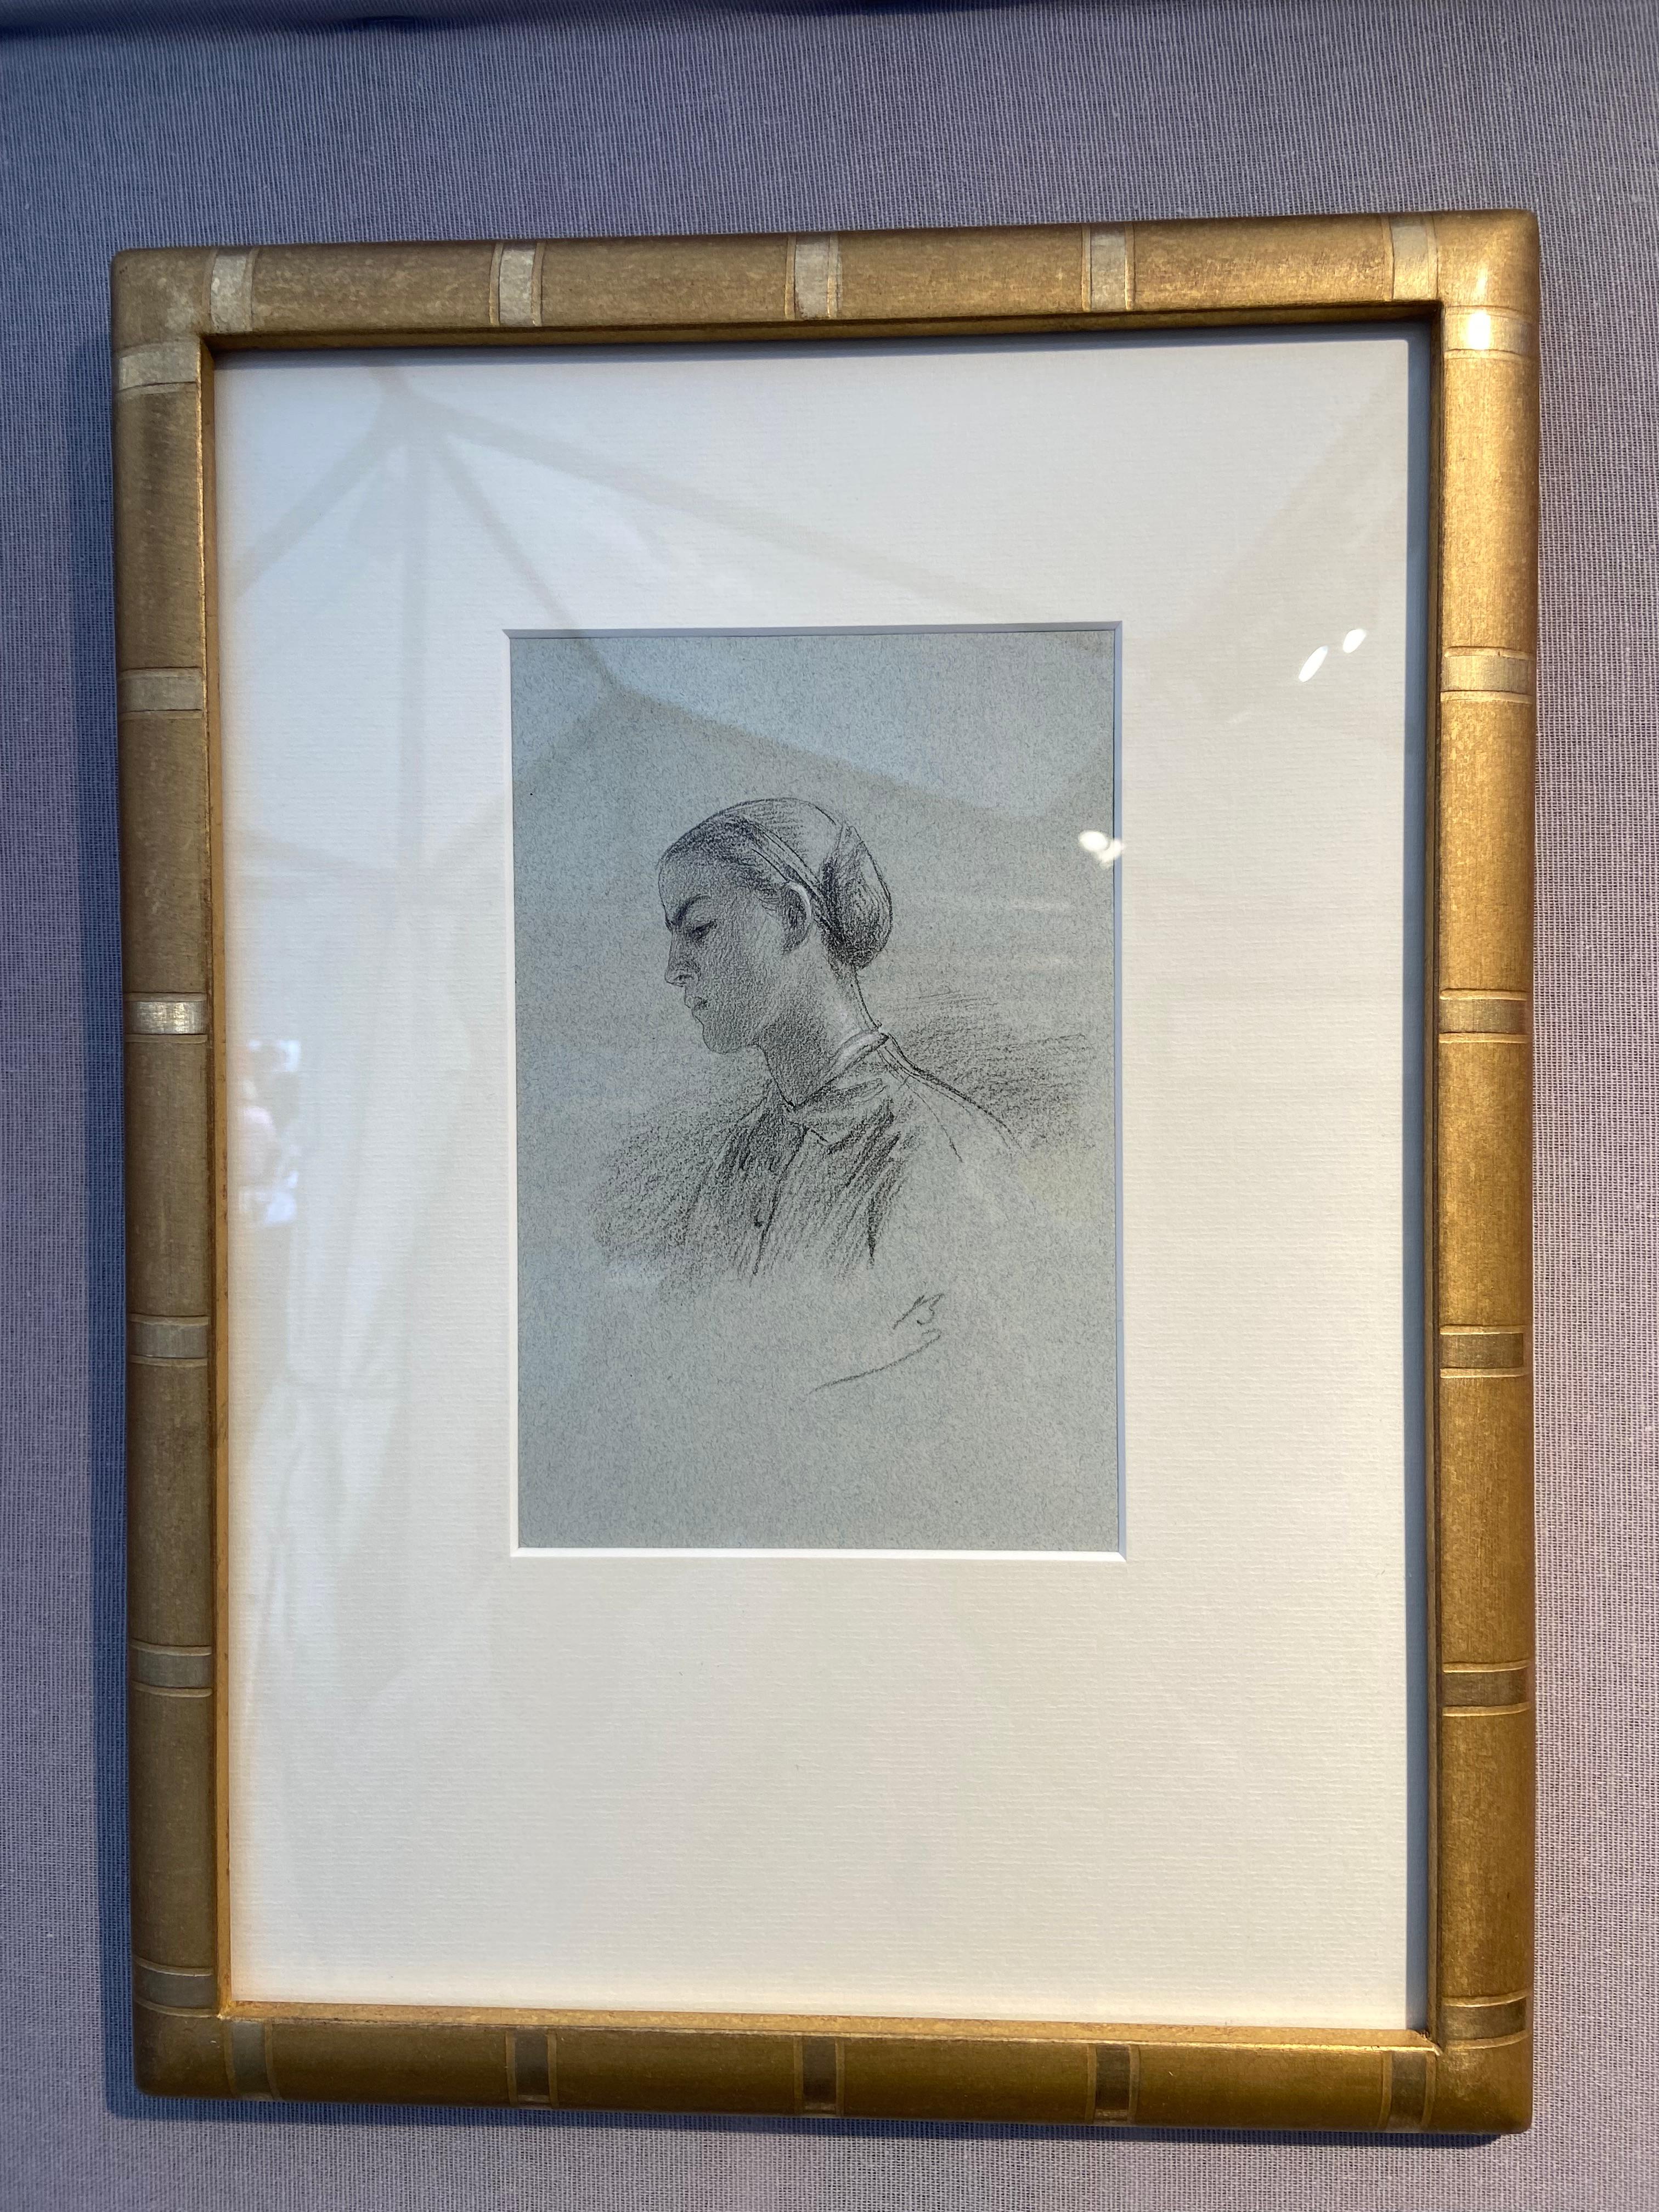 Alexandre Bida (1813-1895)
A Young Woman in Profile
Signed with the monogram lower right
Pencil on grey-blue paper
17.7 x 11.5 cm
Framed : 36.5 x 27 cm

This drawing shows Bida's technical mastery of design. The rendering of shadows and, above all,